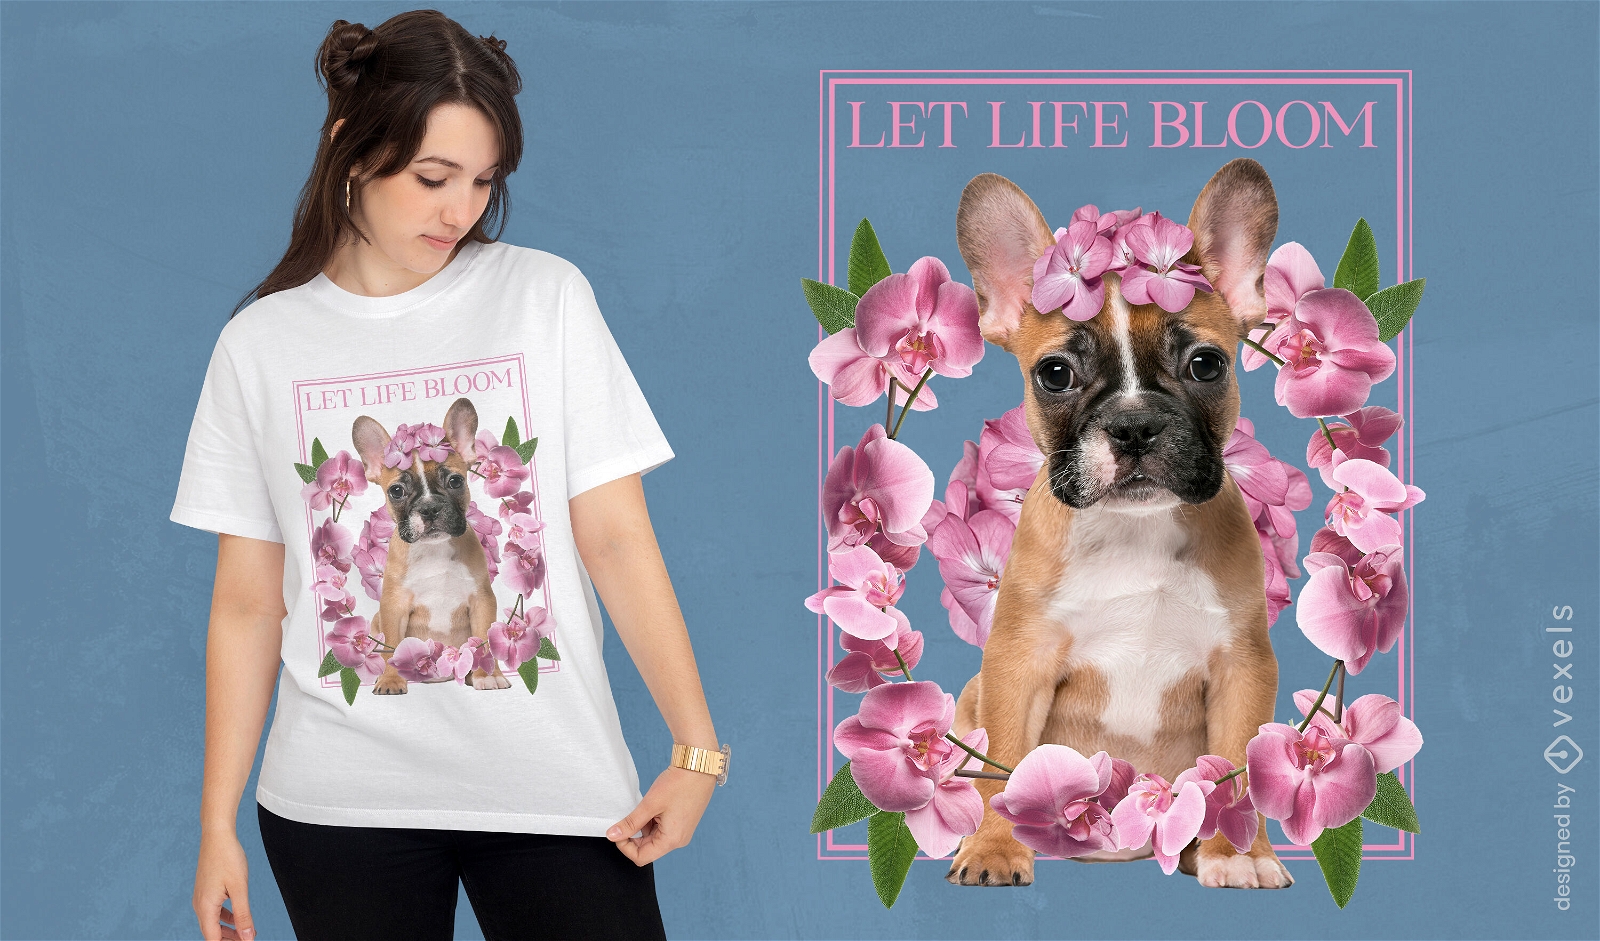 Pug puppy dog with flowers t-shirt psd